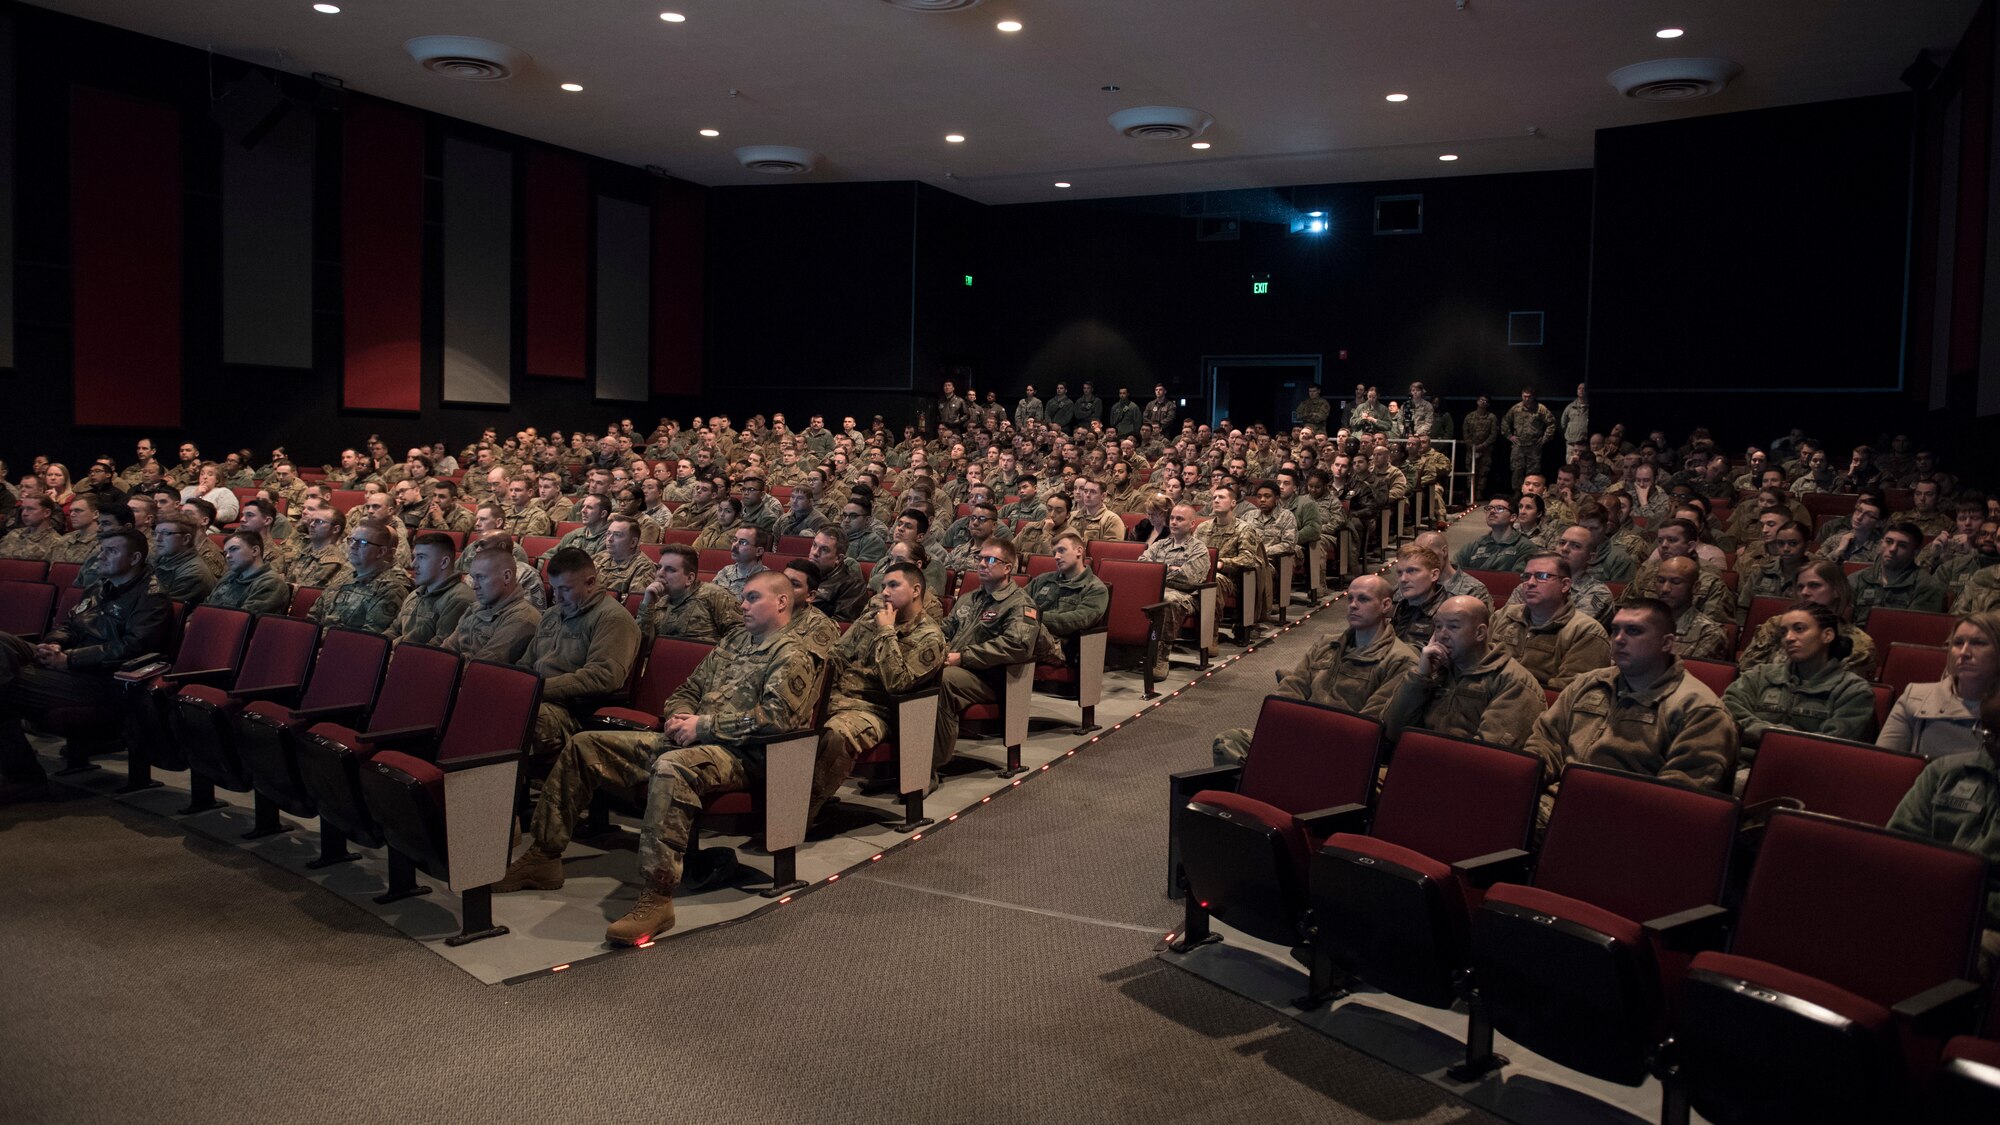 Team Fairchild Airmen pack into the base theater for an all-call meeting at Fairchild Air Force Base, Washington, Jan. 15, 2020. Having a busy, yet successful 2019, Col. Derek Salmi, 92nd Air Refueling Wing commander, spoke to Airmen from around the base to thank and congratulate them for their dedicated efforts and to brief them on the work that lay in store for them in the coming year. (U.S. Air Force photo by Staff Sgt. Ryan Lackey)